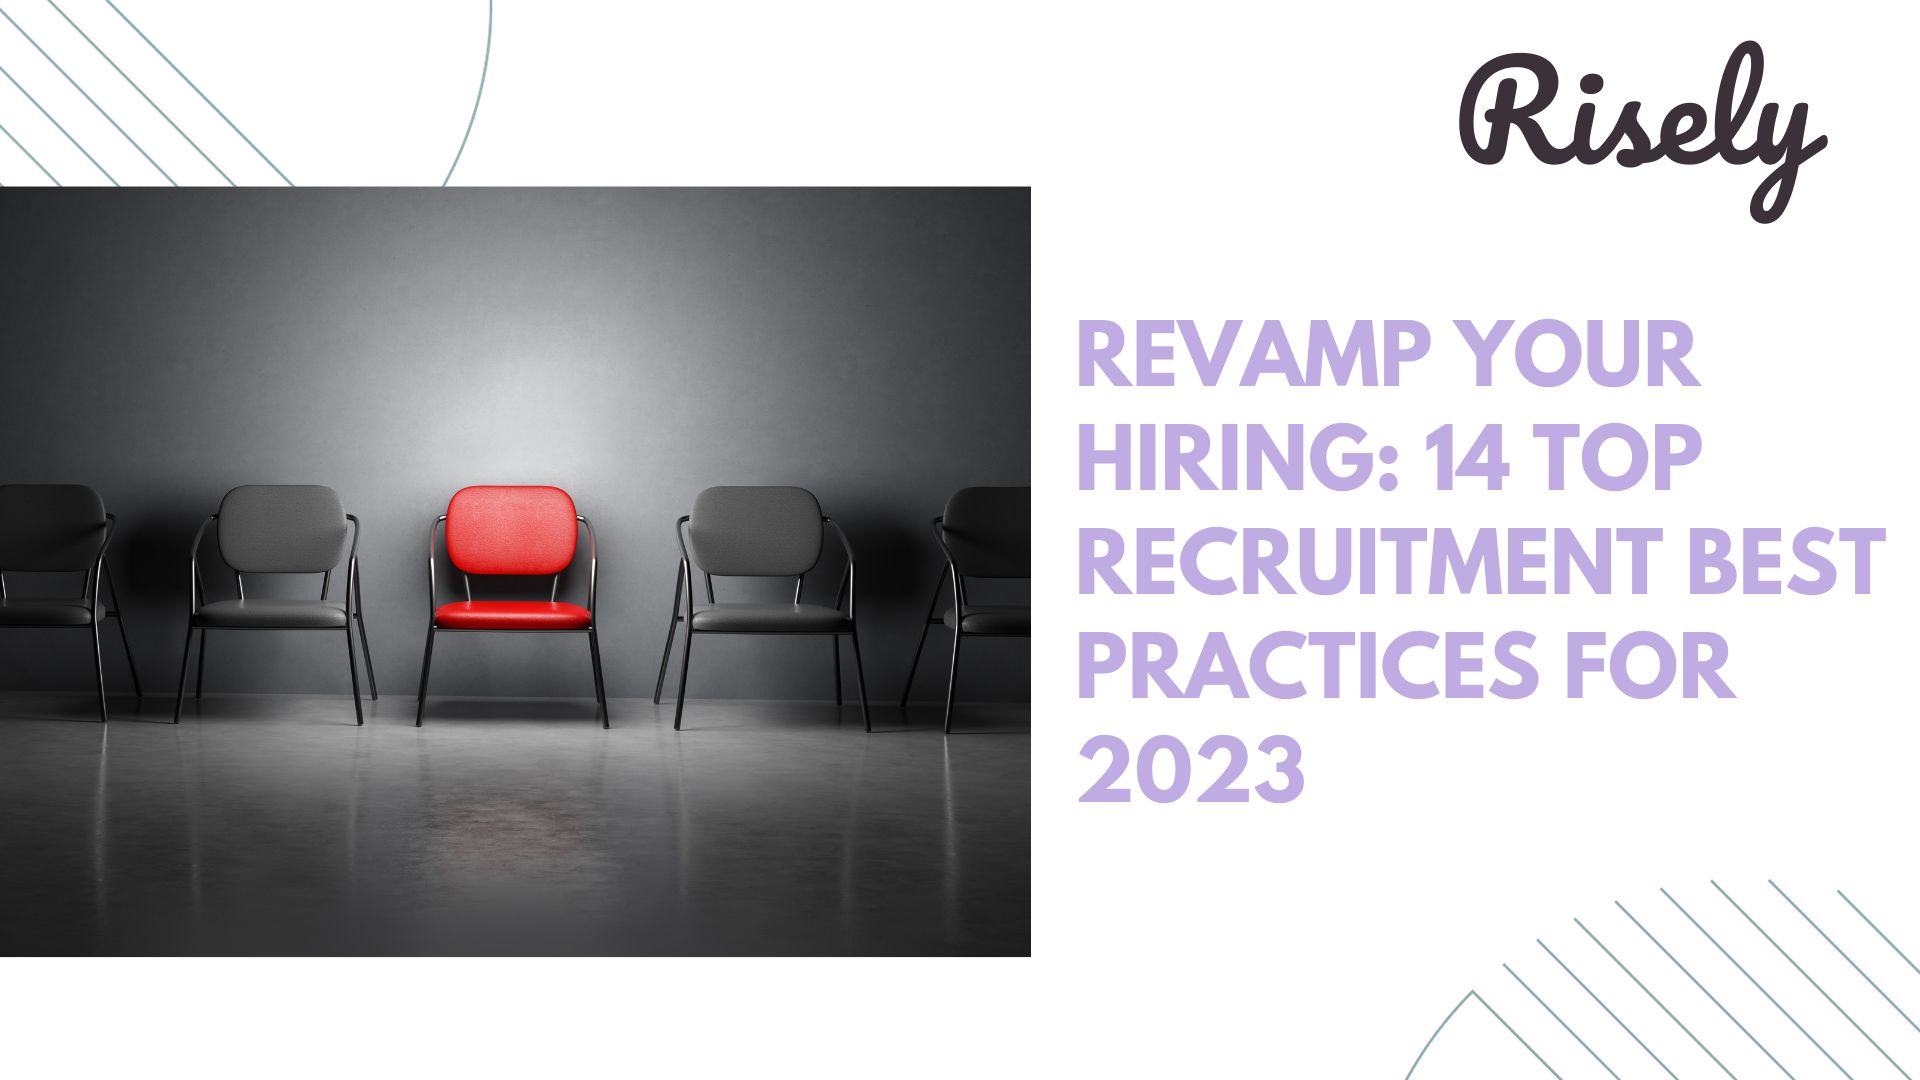 Revamp Your Hiring: 14 Top Recruitment Best Practices for 2023